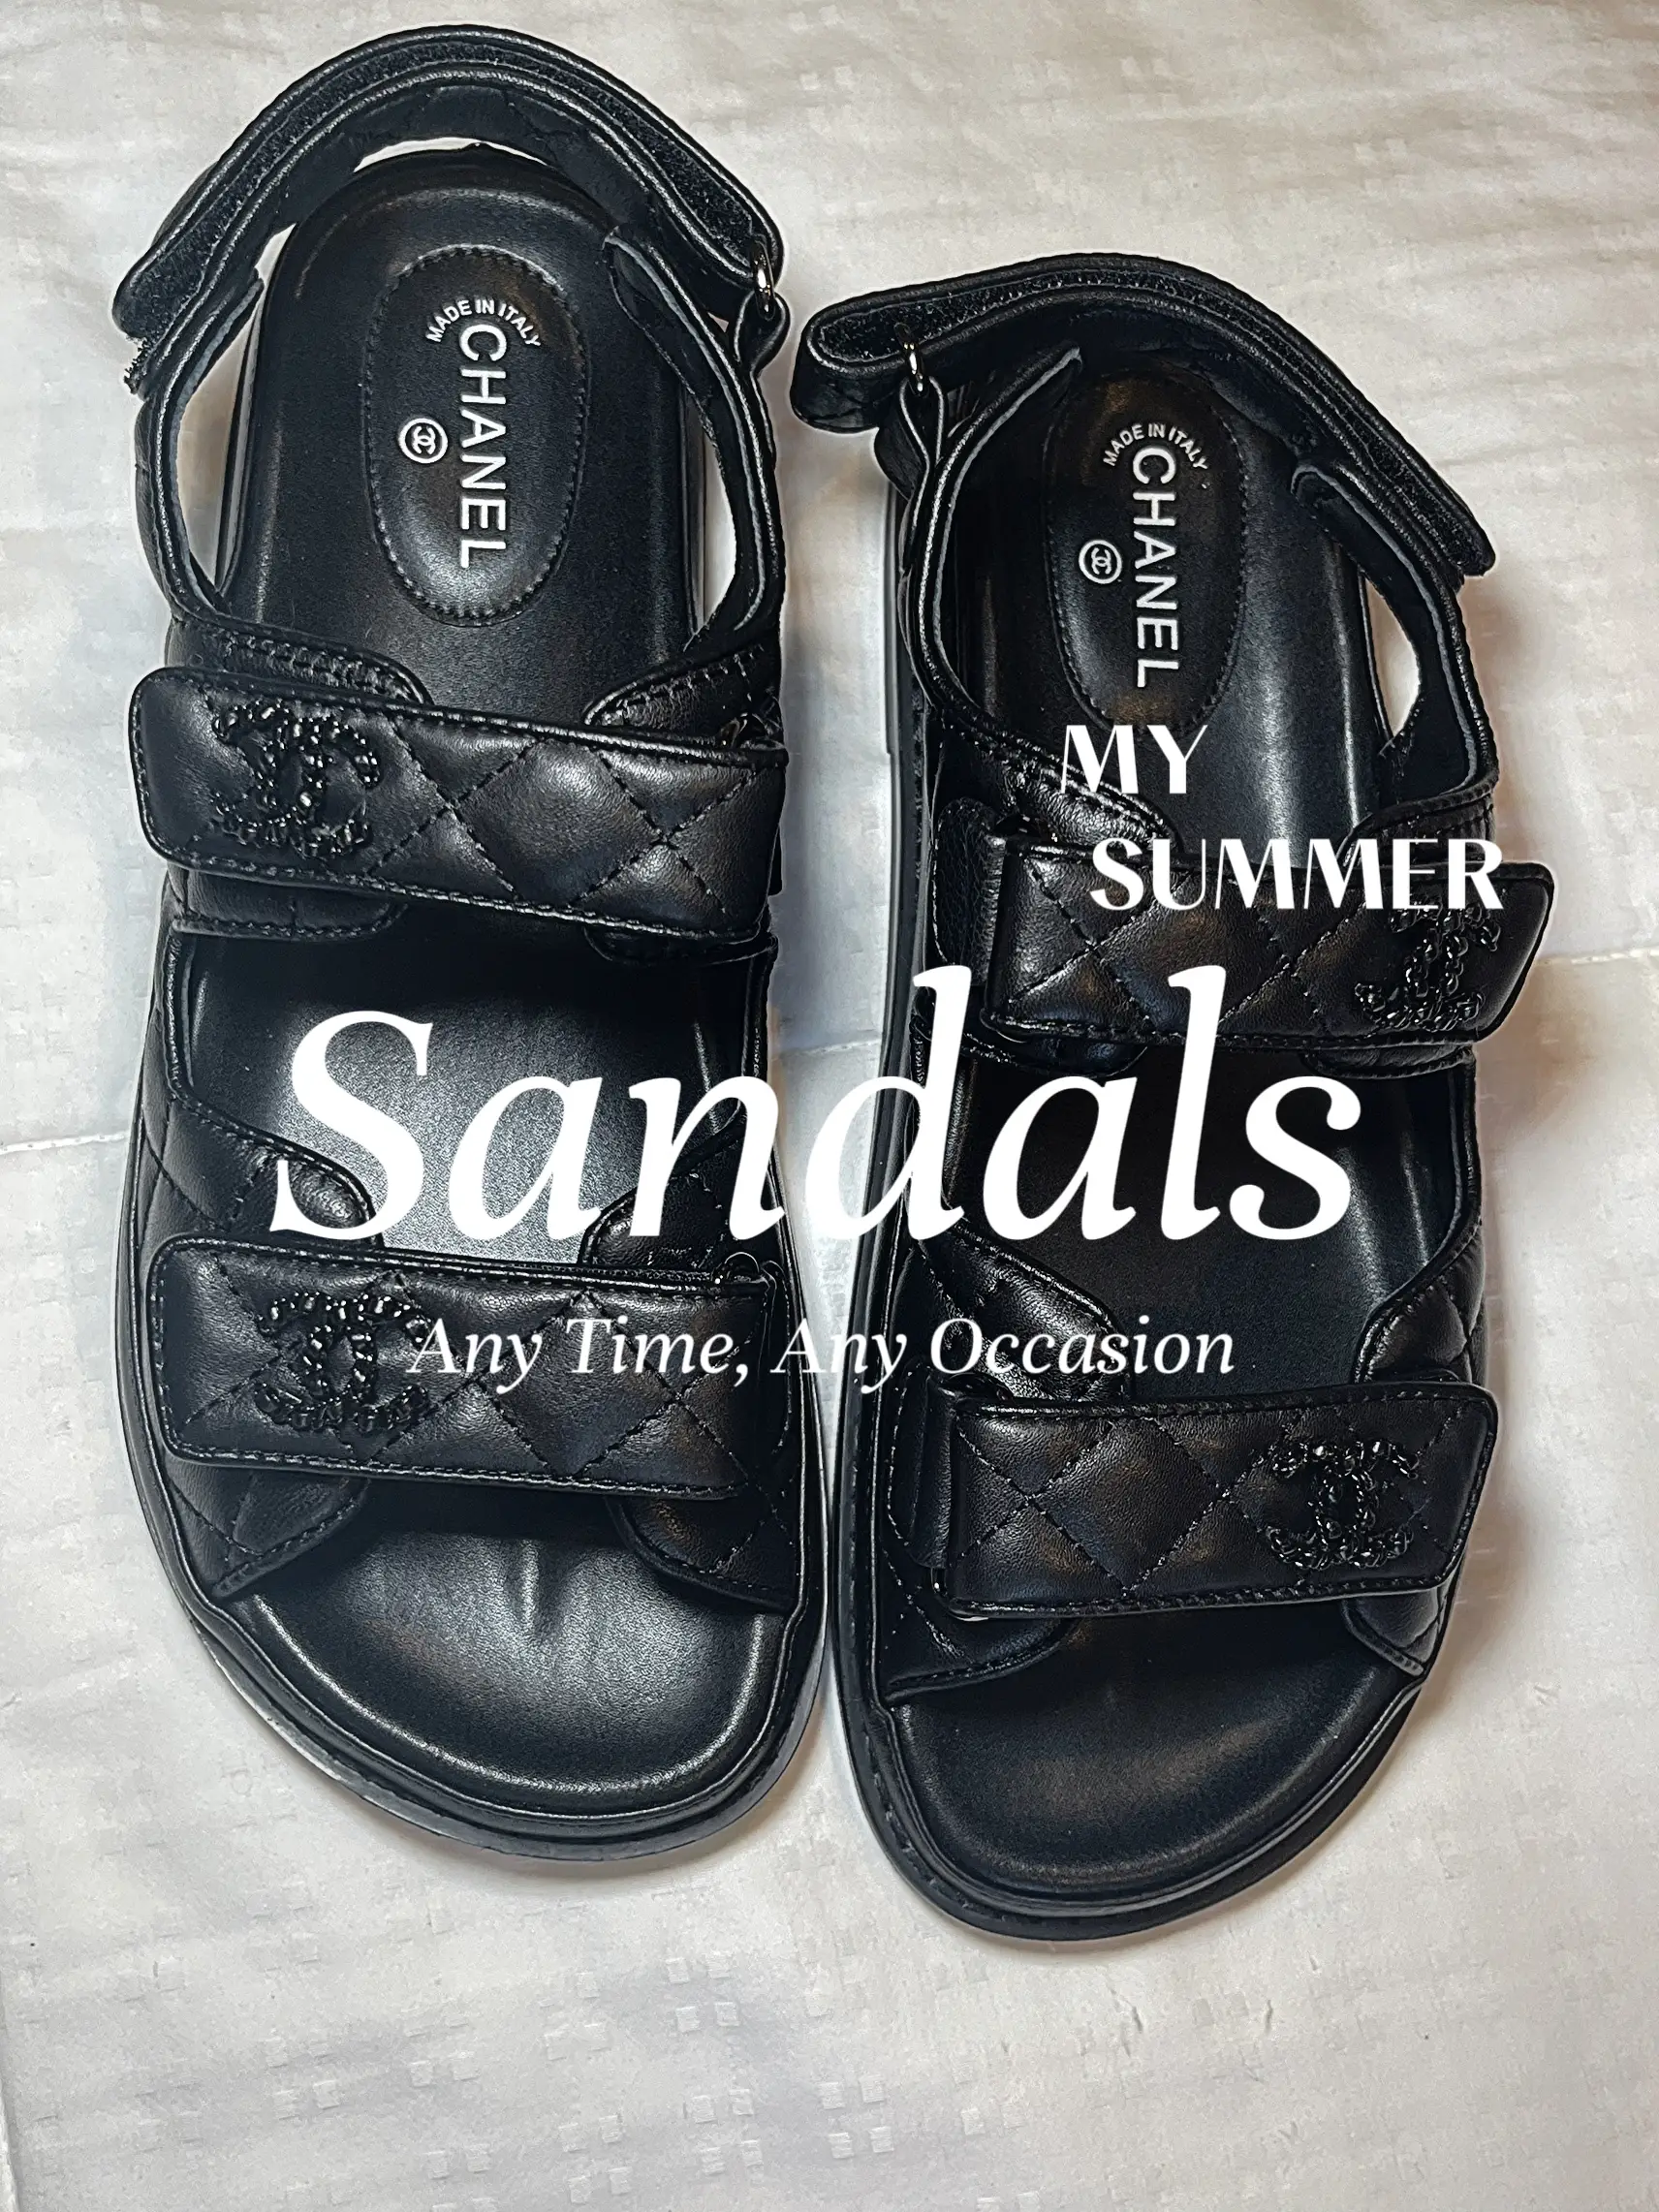 The Chanel dad sandals are the It-girl's summer must-have